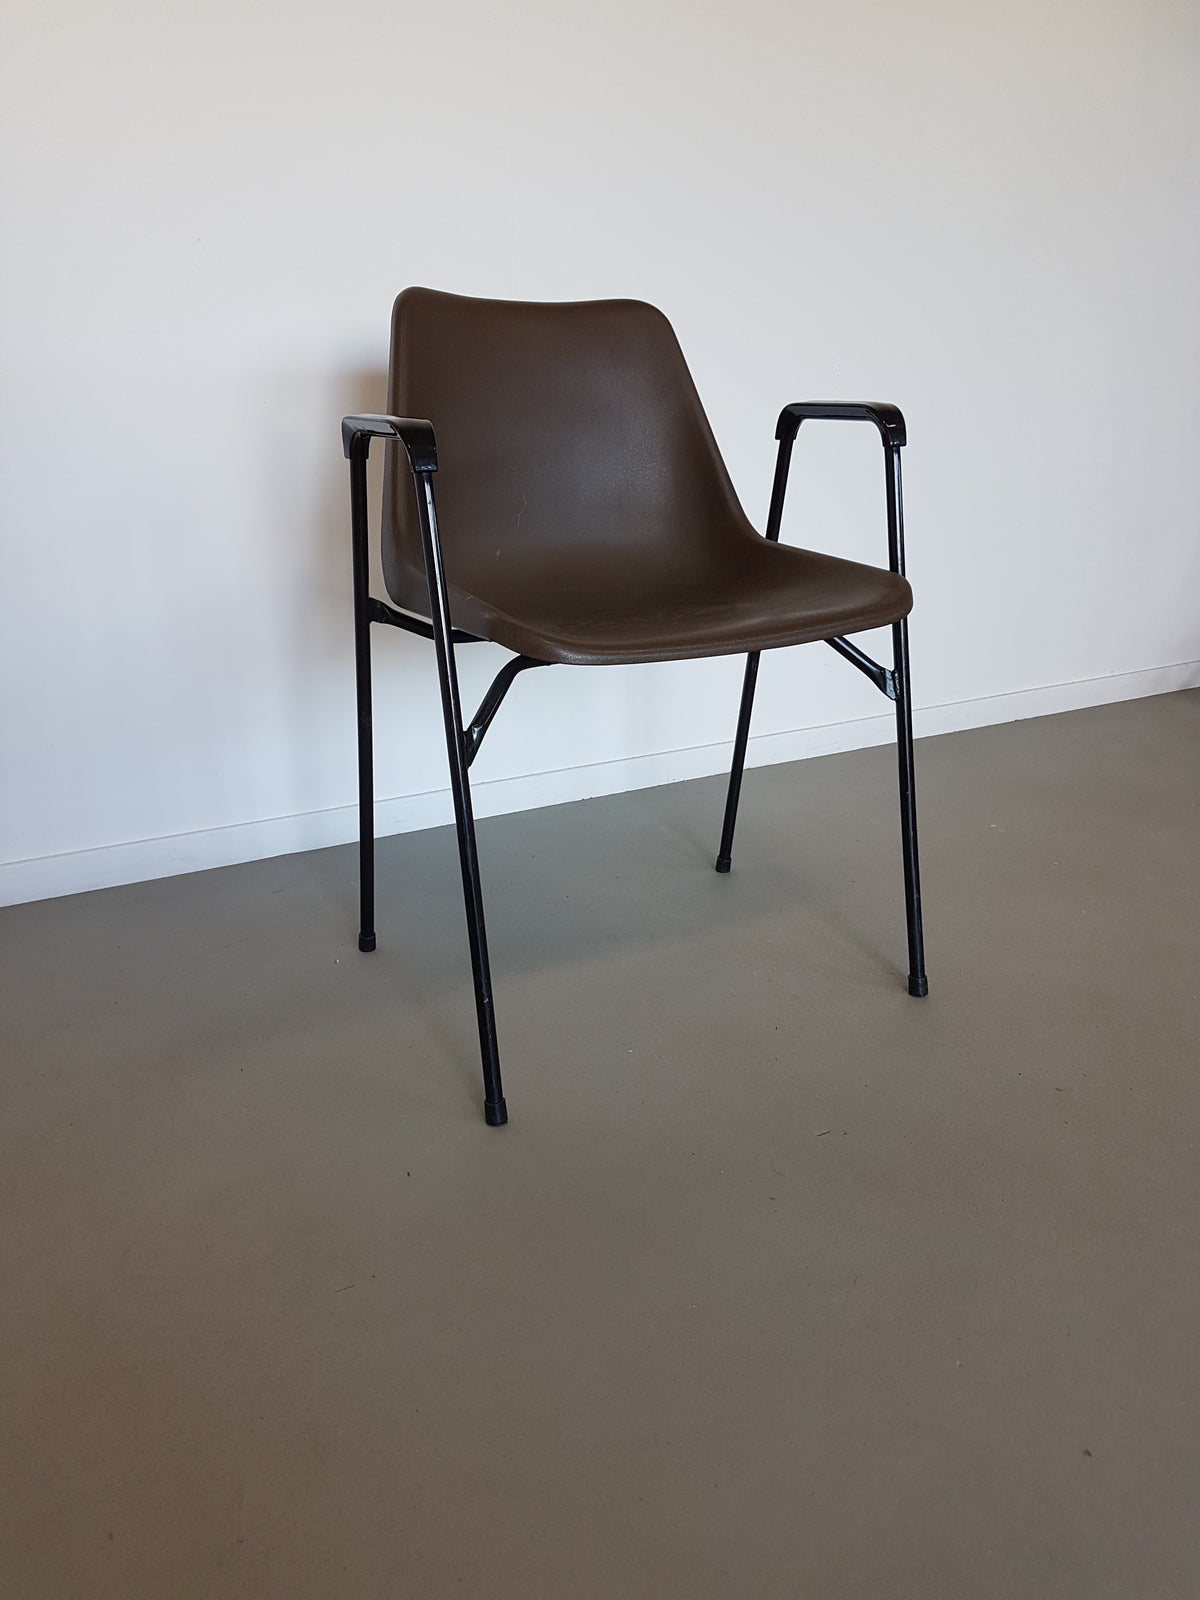 14 x The Polyside chair was designed for Hille by Robin Day and was a worldwide success from the moment it was launched in 1963 .